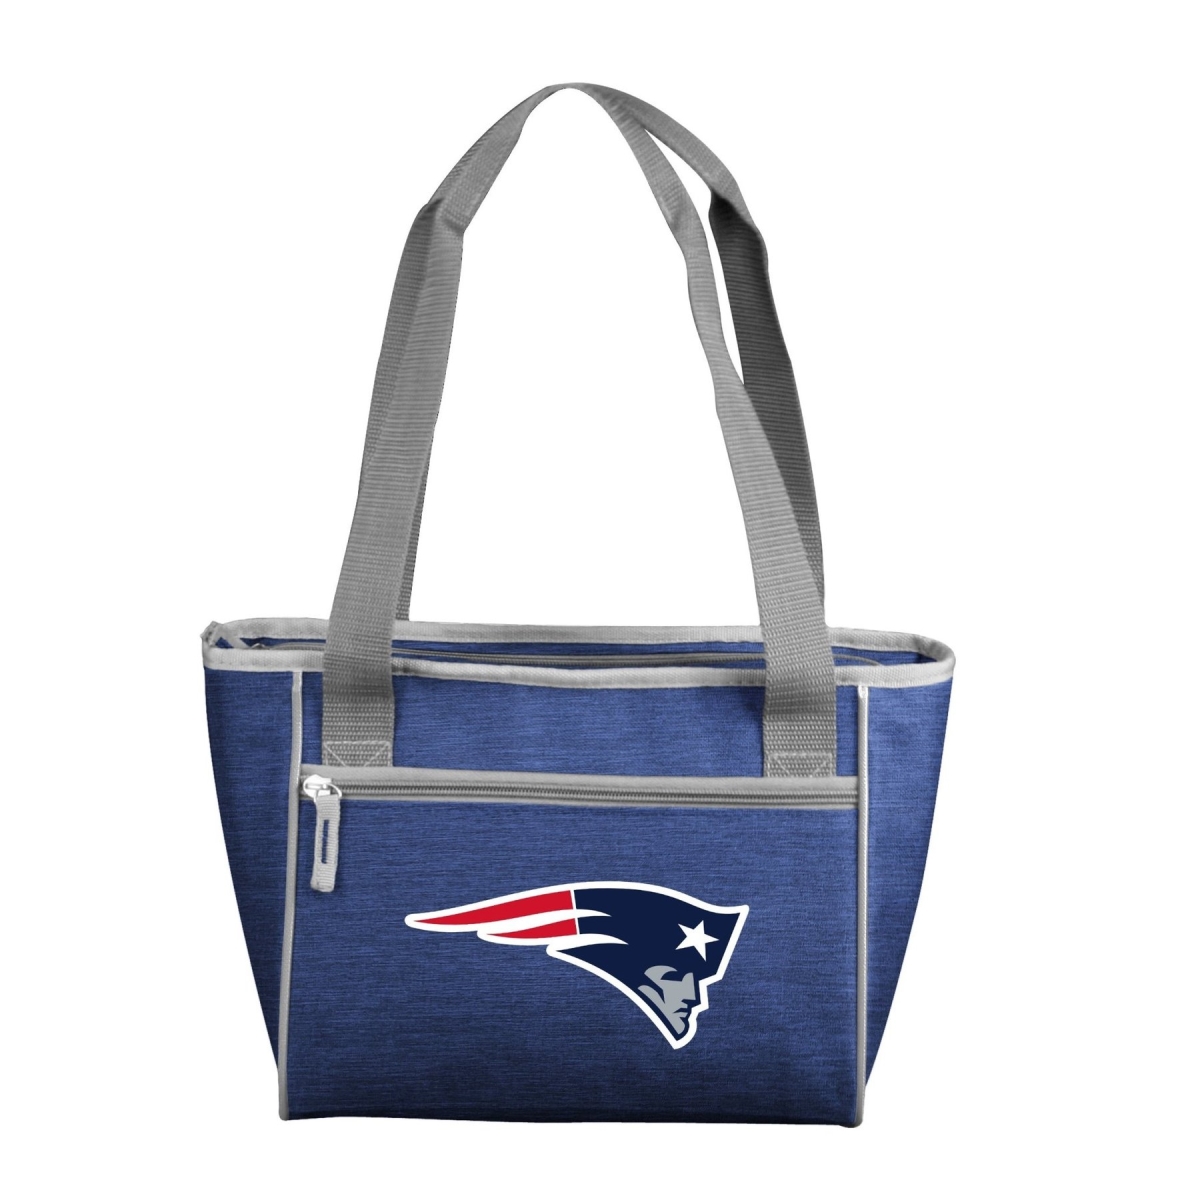 Picture of Logo Chair 619-83-CR1 NFL New England Patriots Crosshatch Cooler Tote Bag Holds for 16 Cans